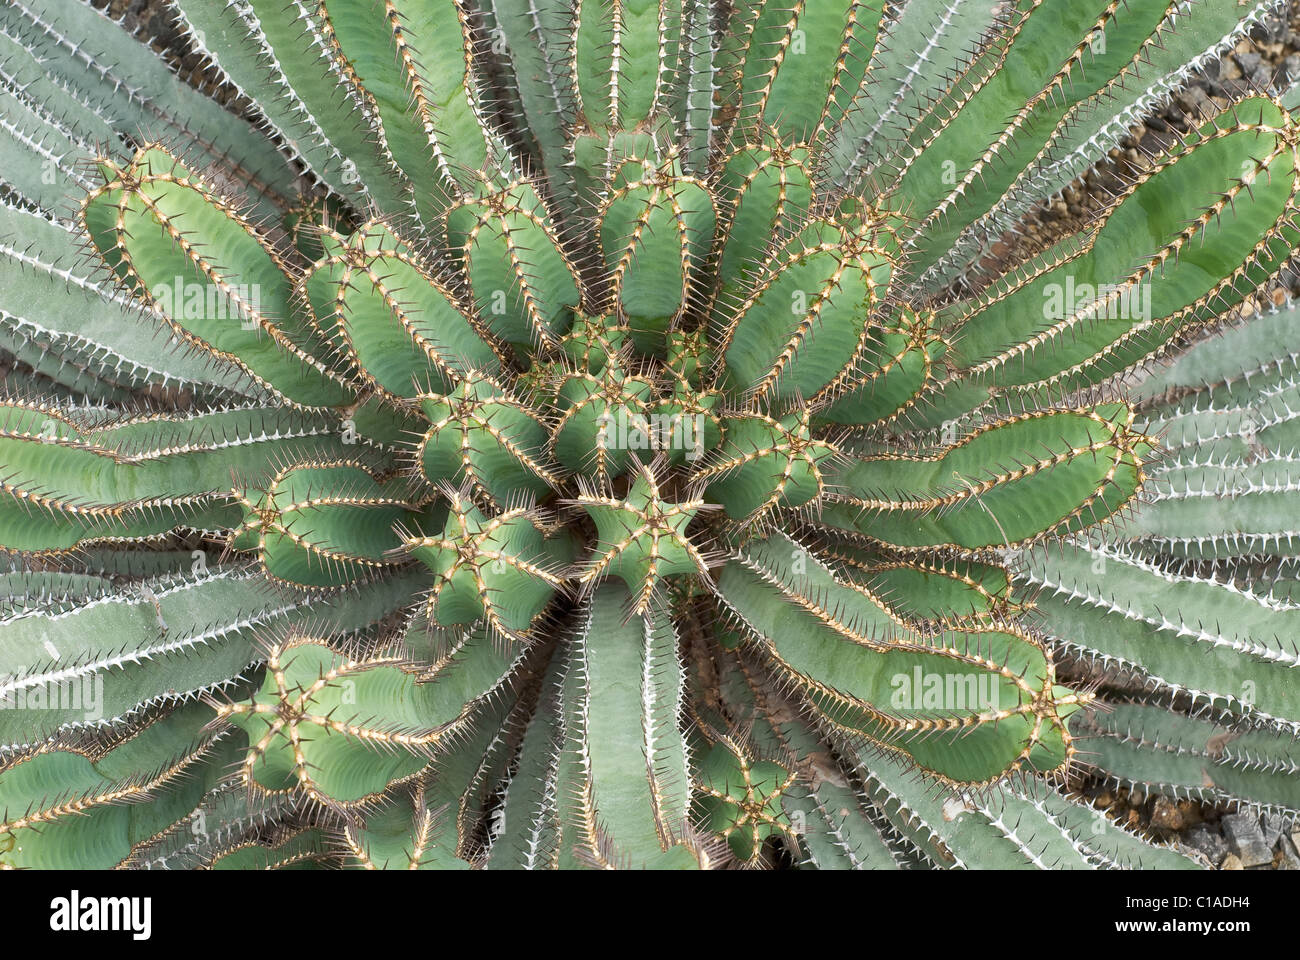 Cactus of the Deserts of Mexico Stock Photo